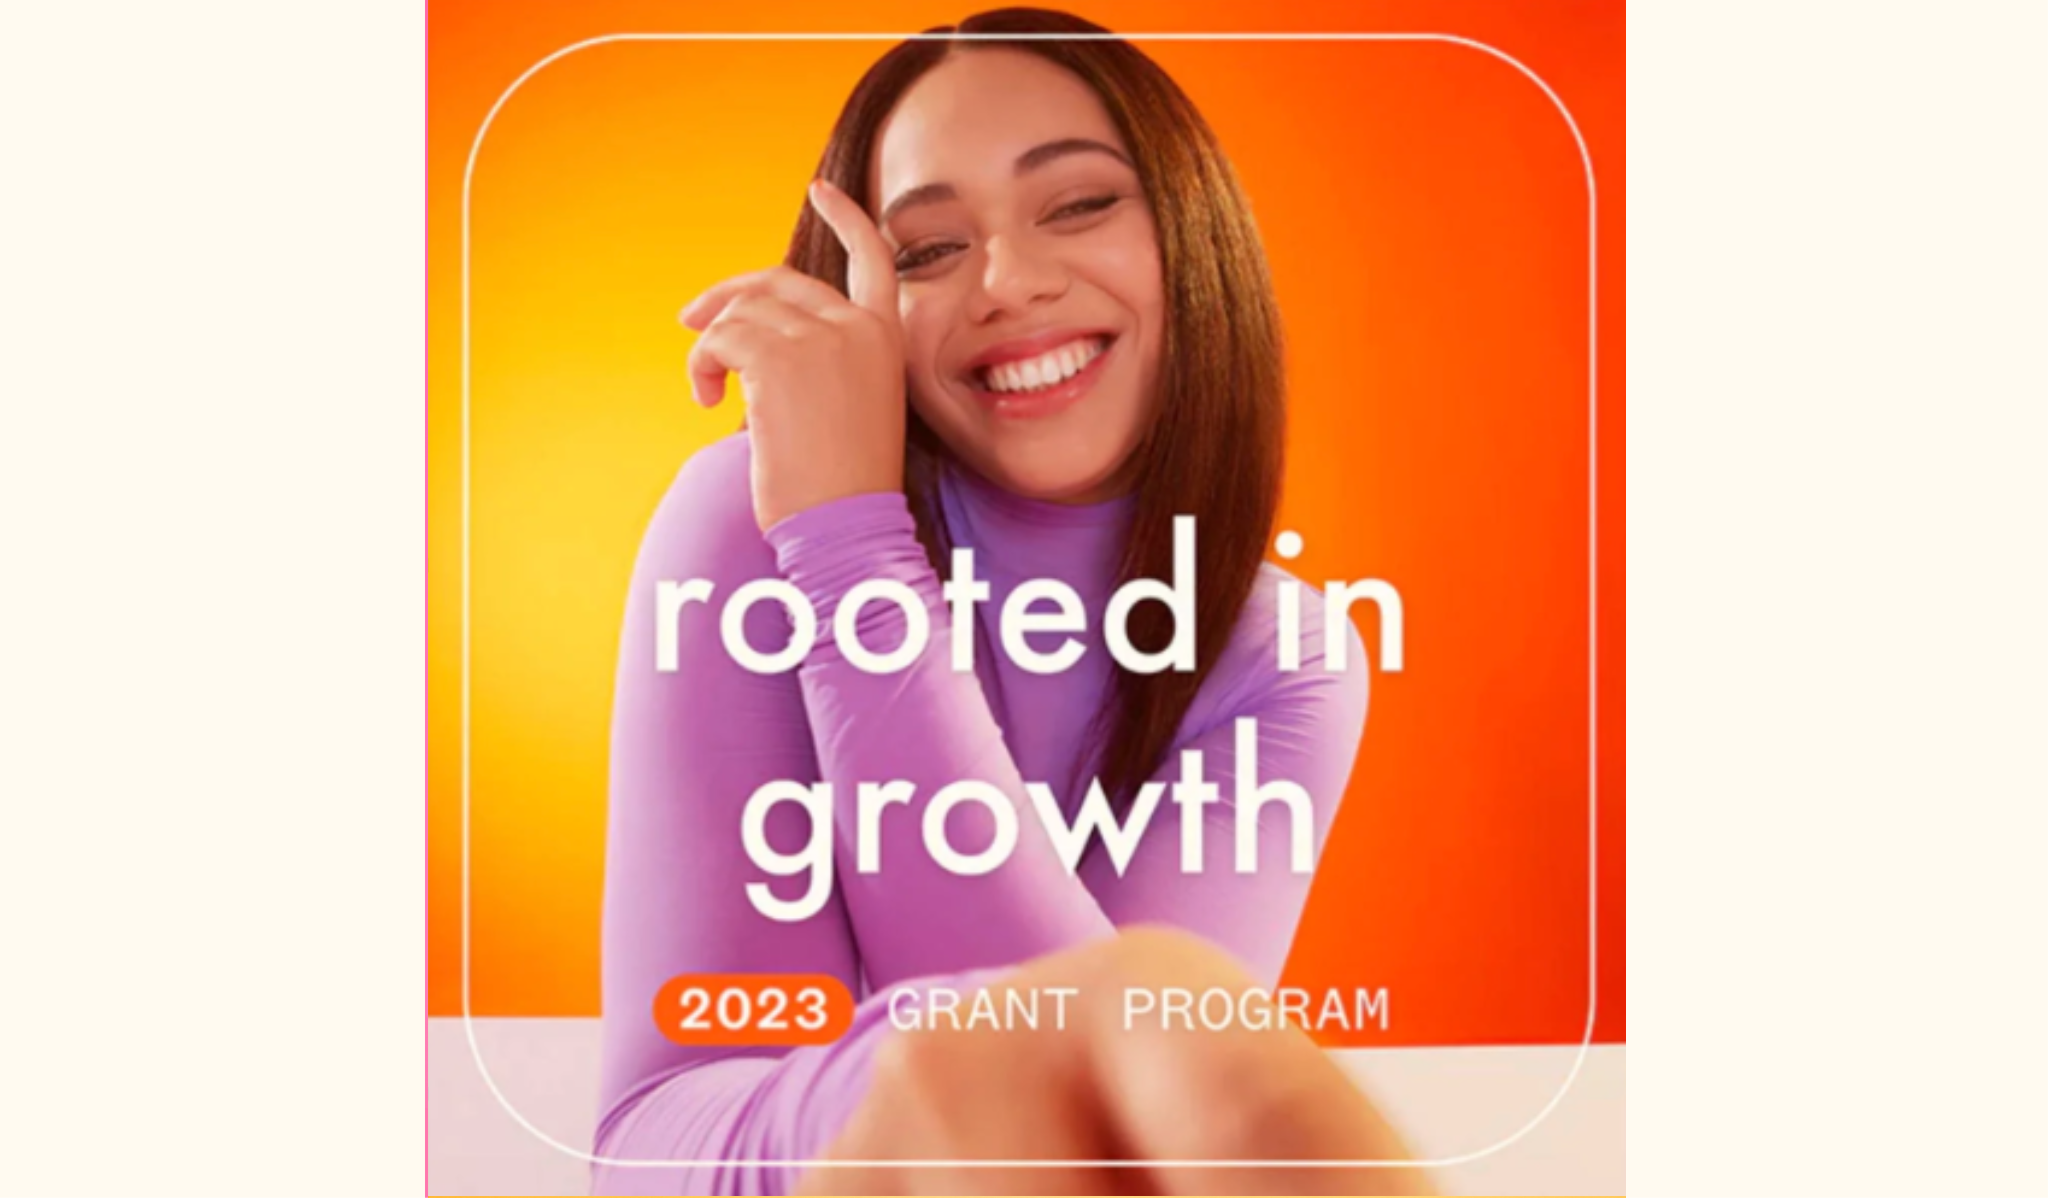 rooted in growth 2023 grant program graphic